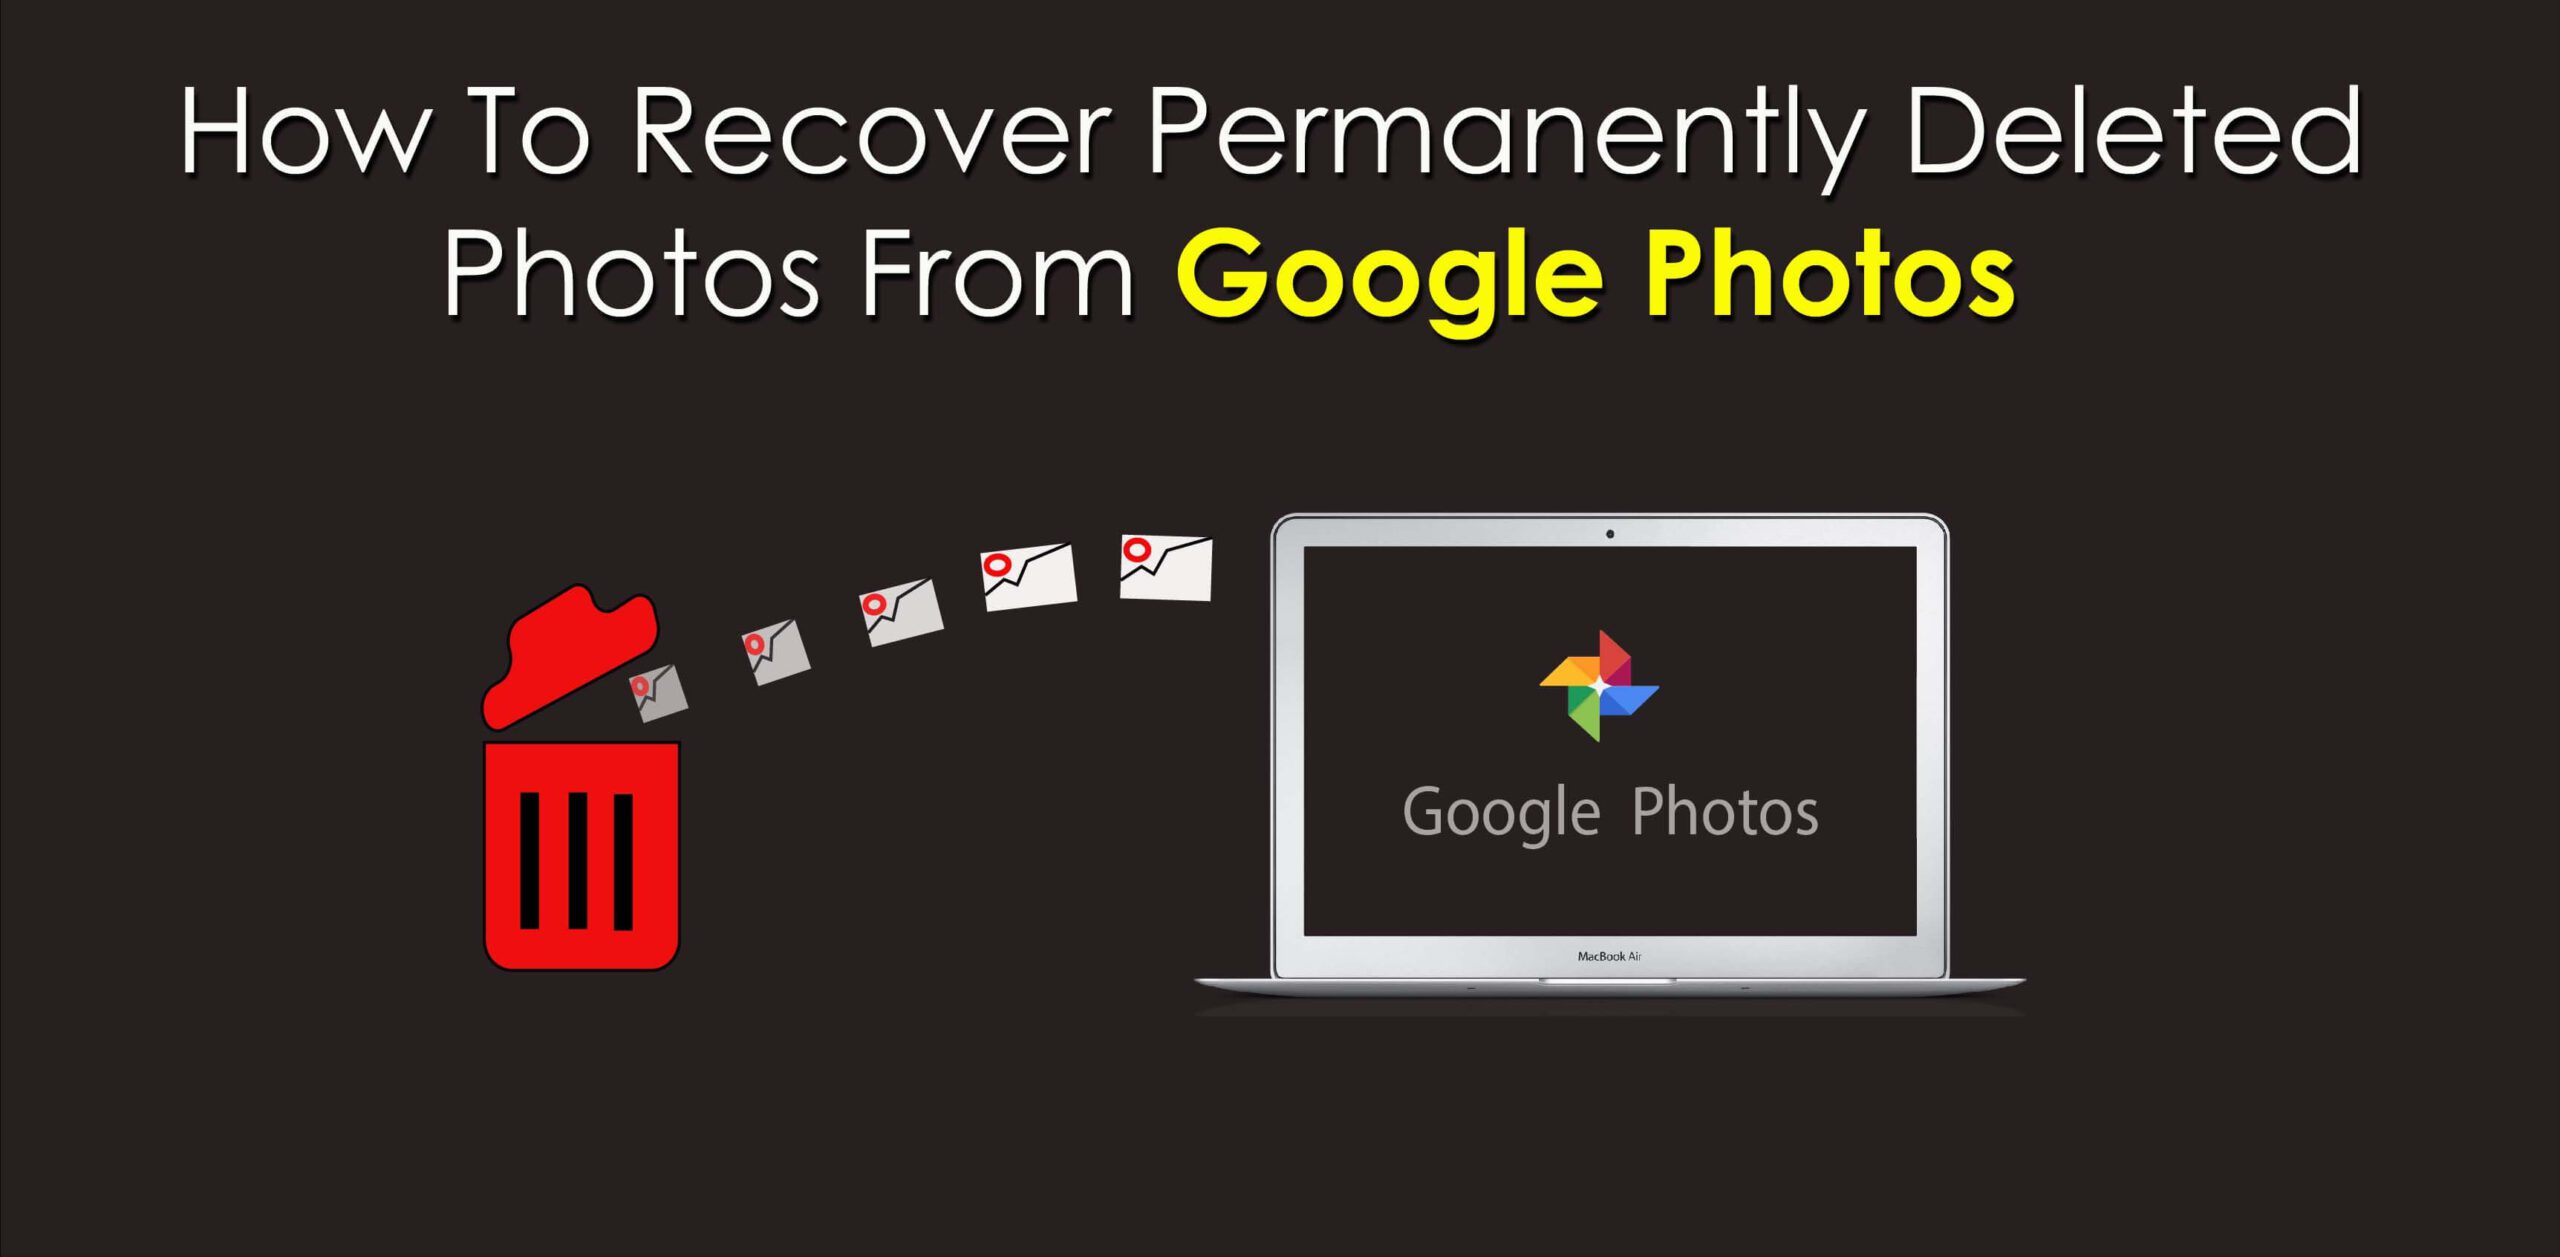 Recover Permanently Deleted Photos From Google Photos